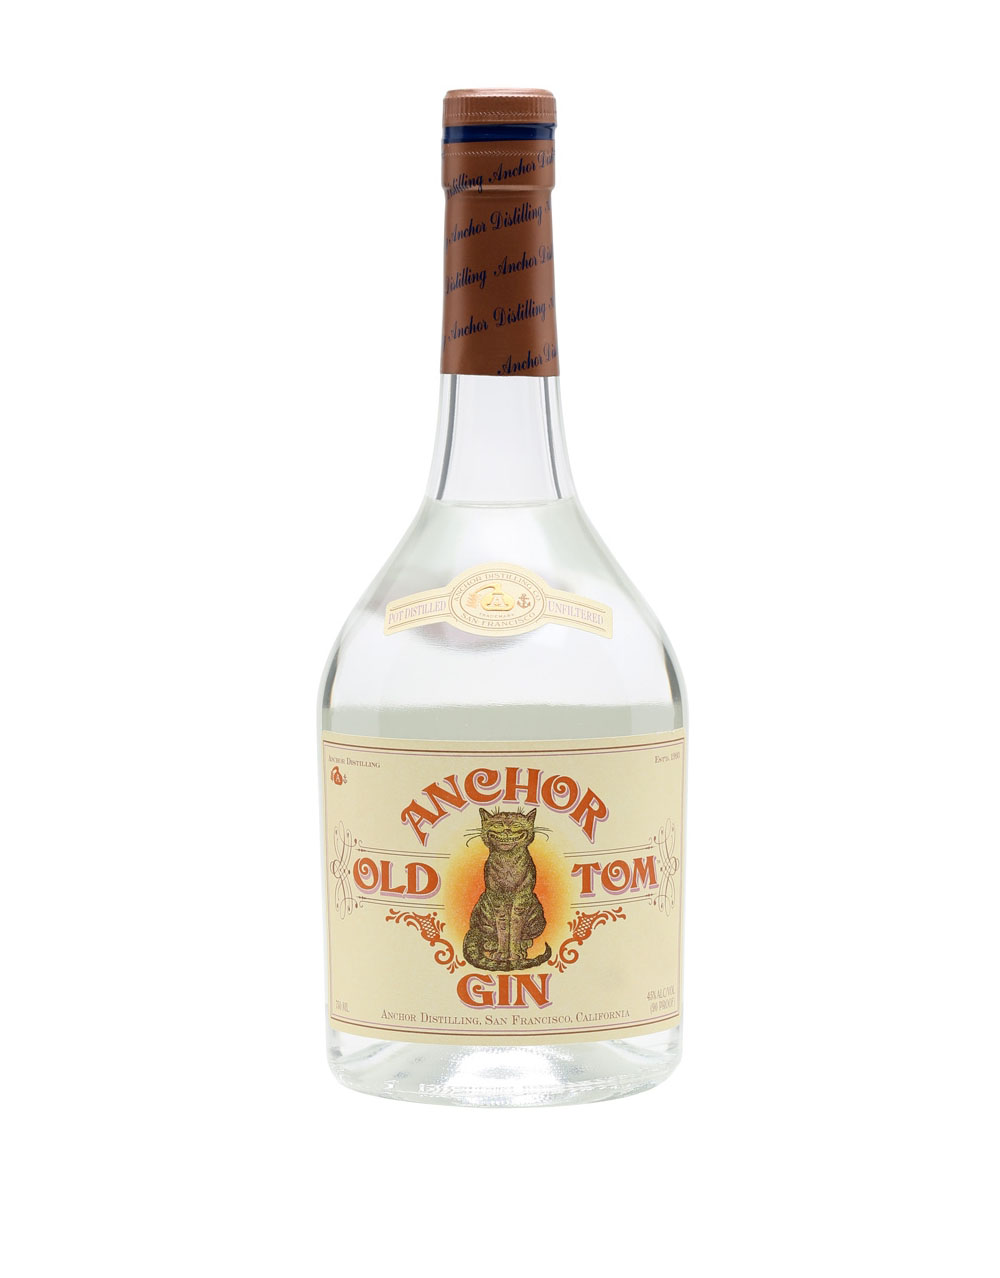 Anchor Old Tom Gin